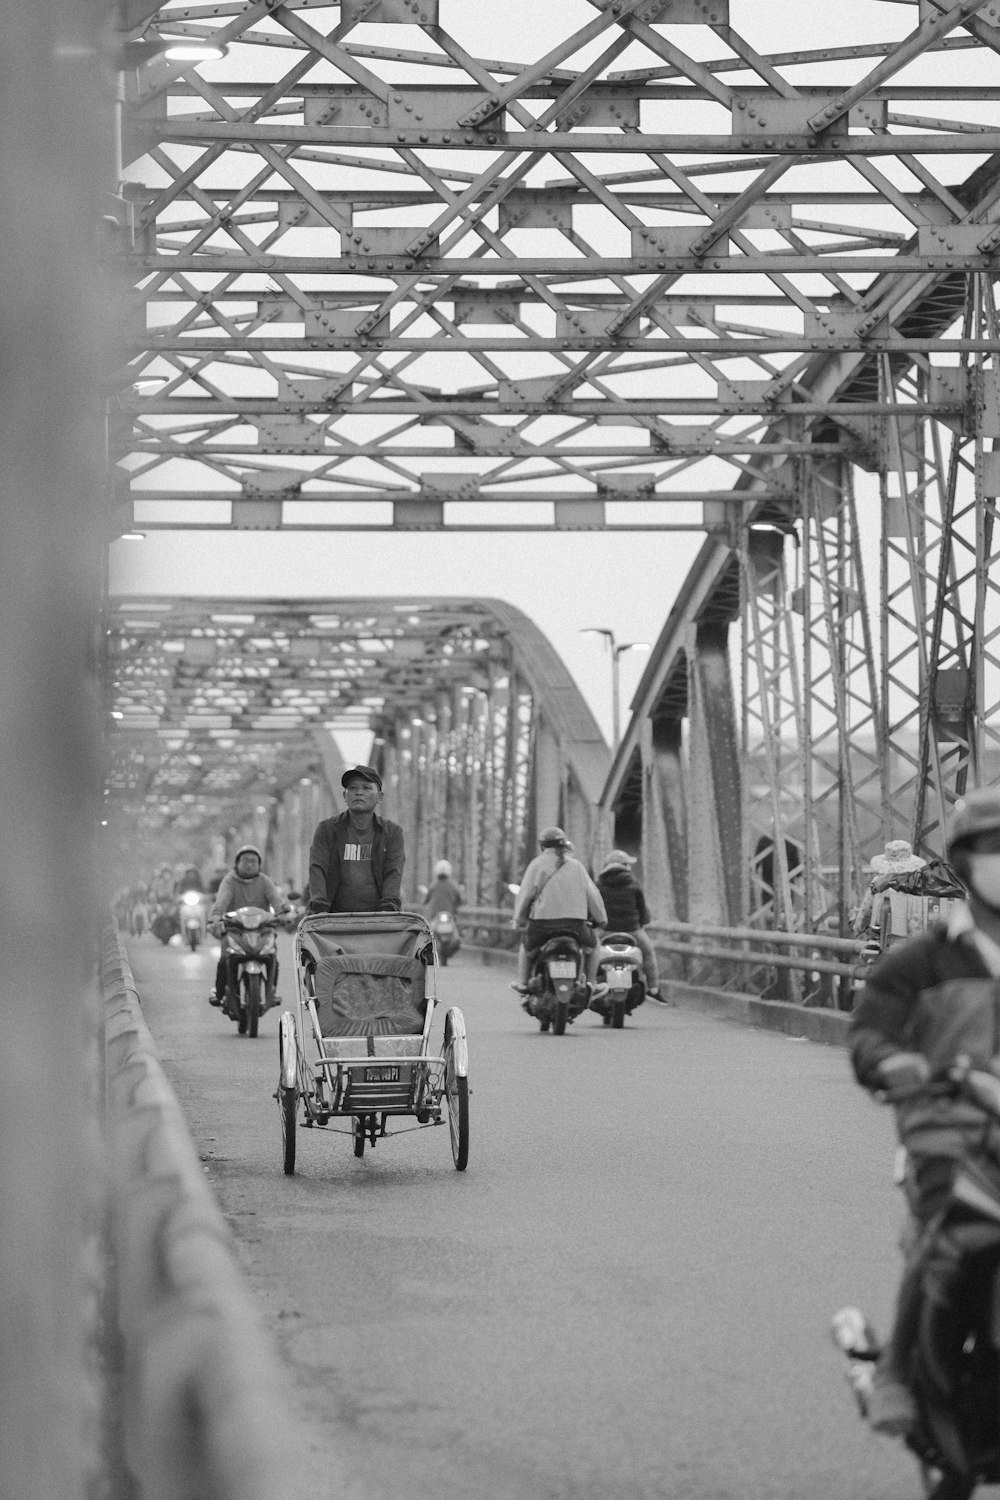 a group of people riding motorcycles on a bridge